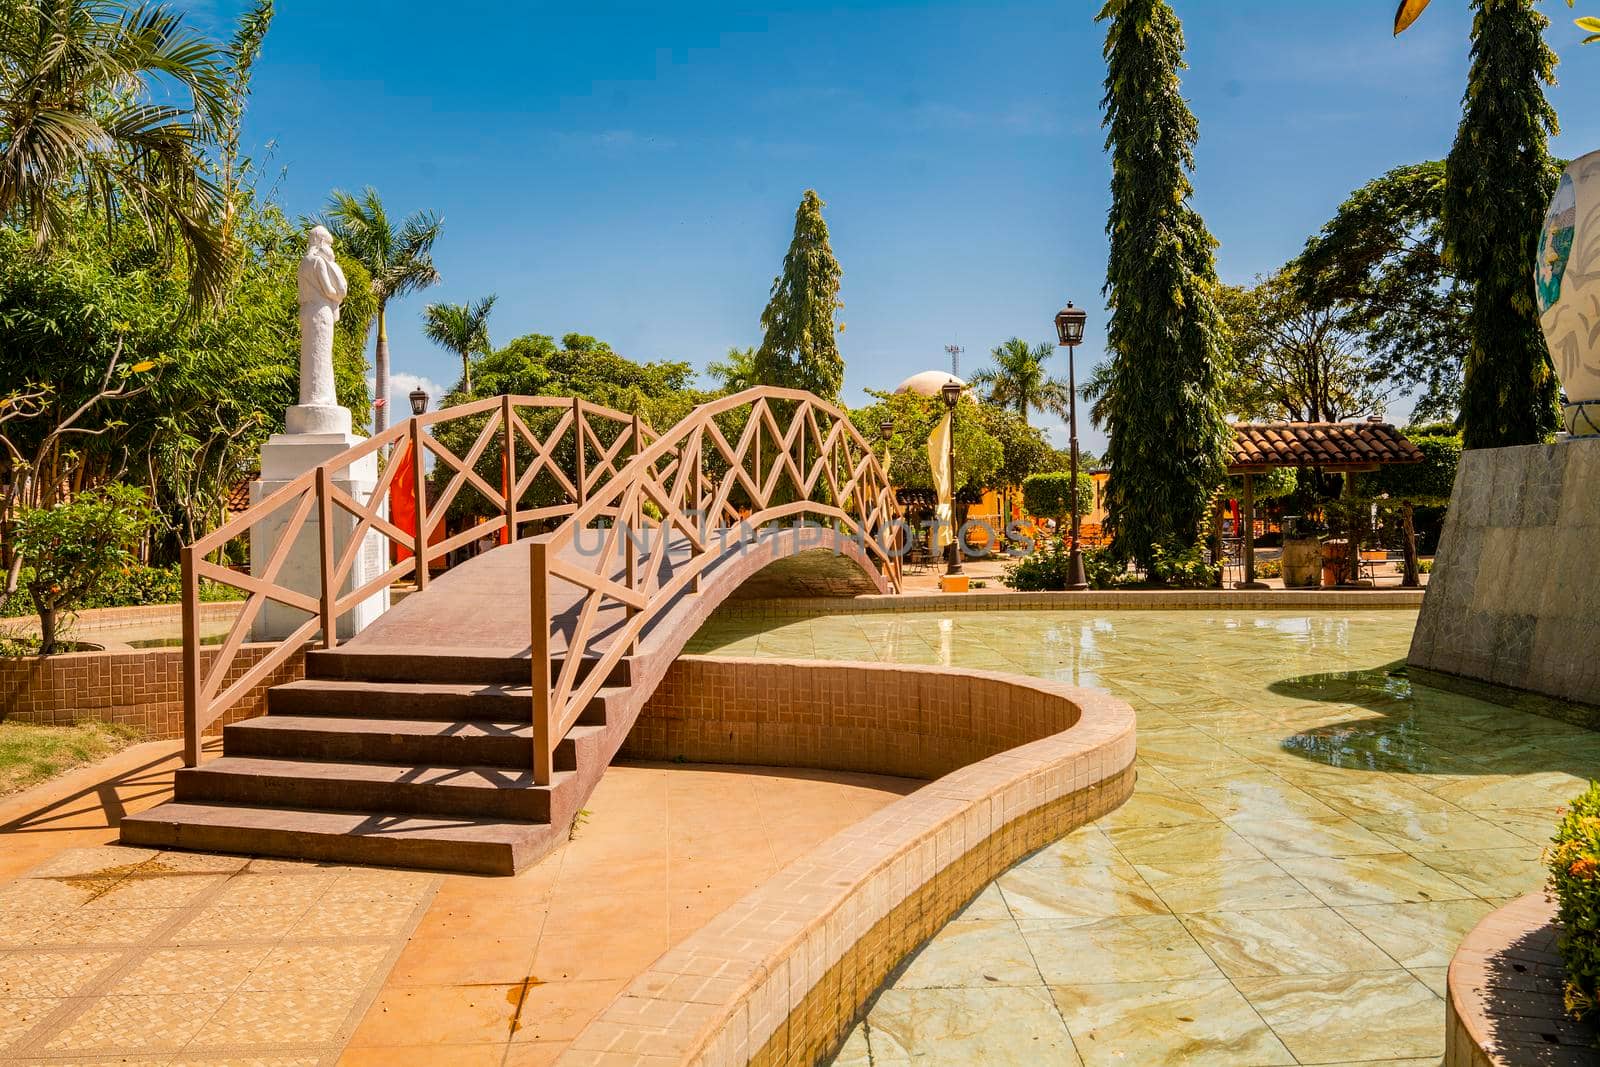 View of a calm park with a small wooden bridge over a water fountain. Nagarote central park.  Image of a nice and relaxed park with a water fountain surrounded by trees. Traditional park of Nagarote, Nicaragua